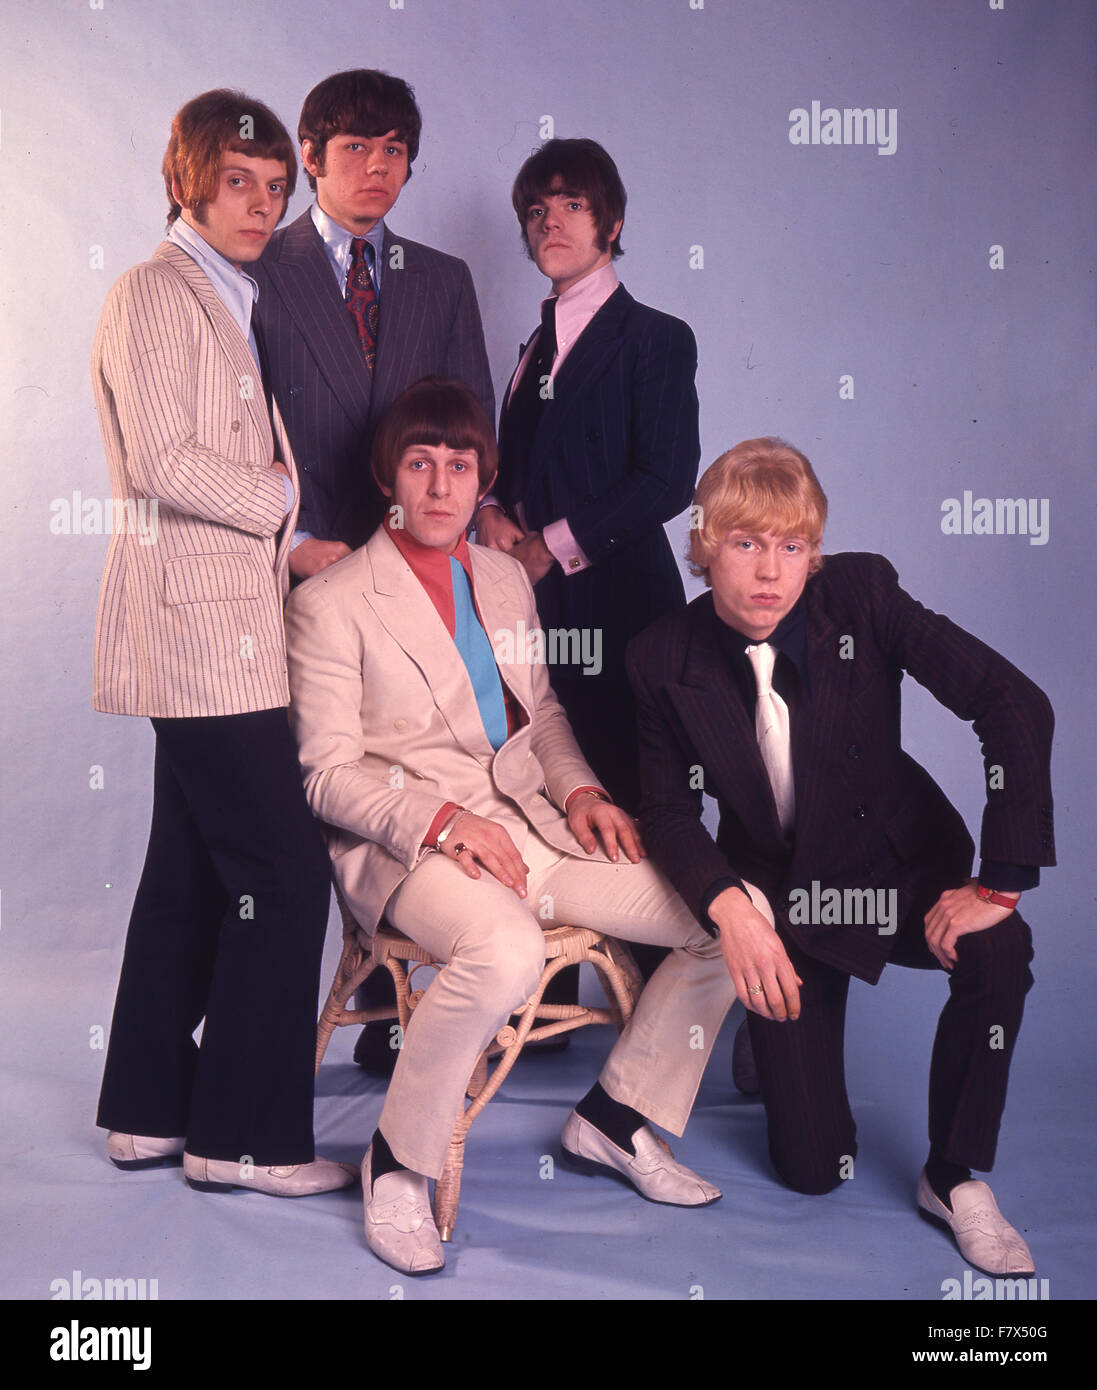 THE MOVE Promotional photo of UK pop group in 1967. From left: Trevor  Burton, Bev Bevan, Carl Wayne (seated), Roy Wood, Ace Kefford Stock Photo -  Alamy